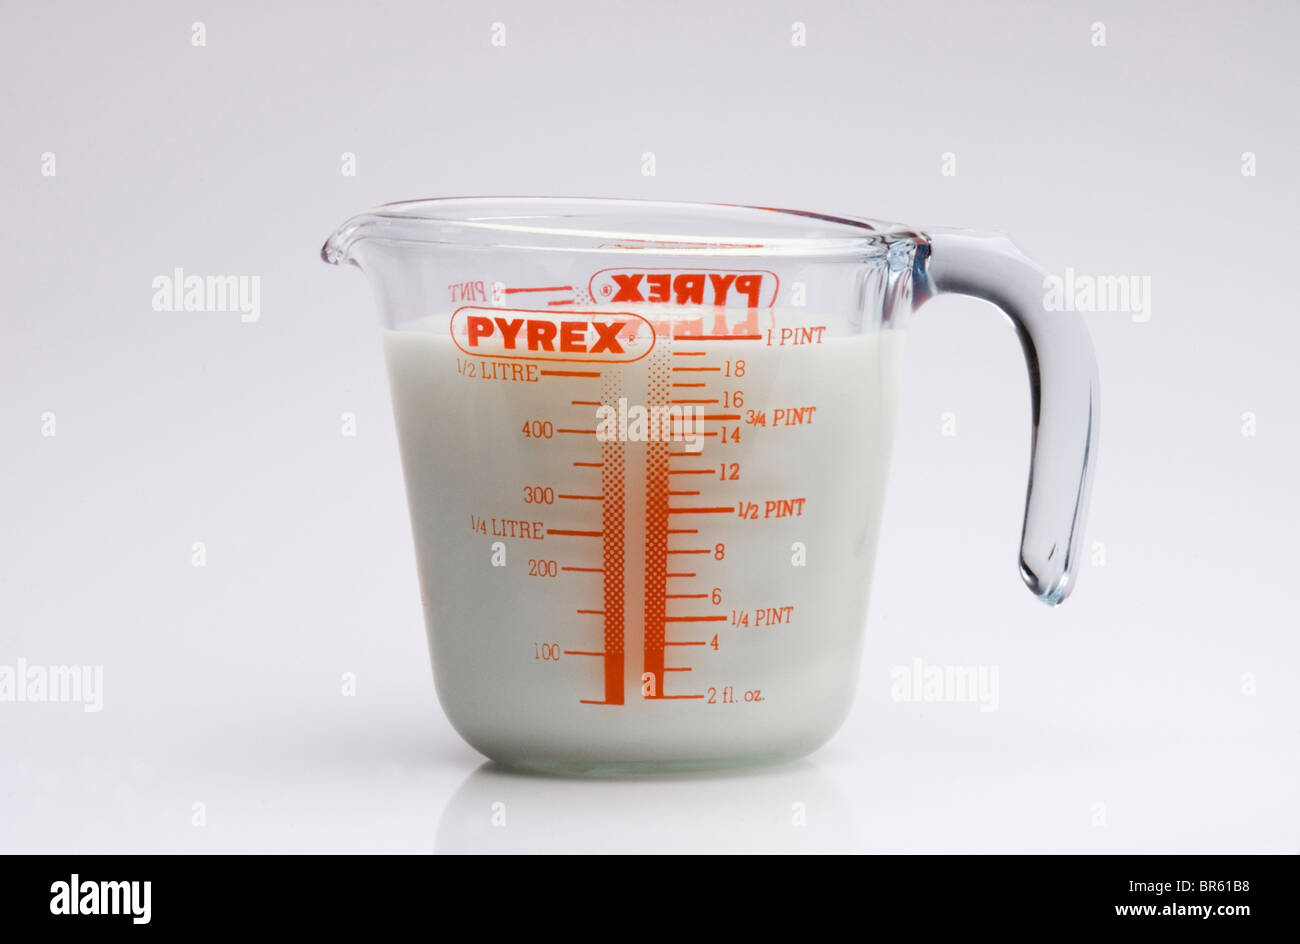 pyrex glass 4 cup measuring cup clear glass red lettering